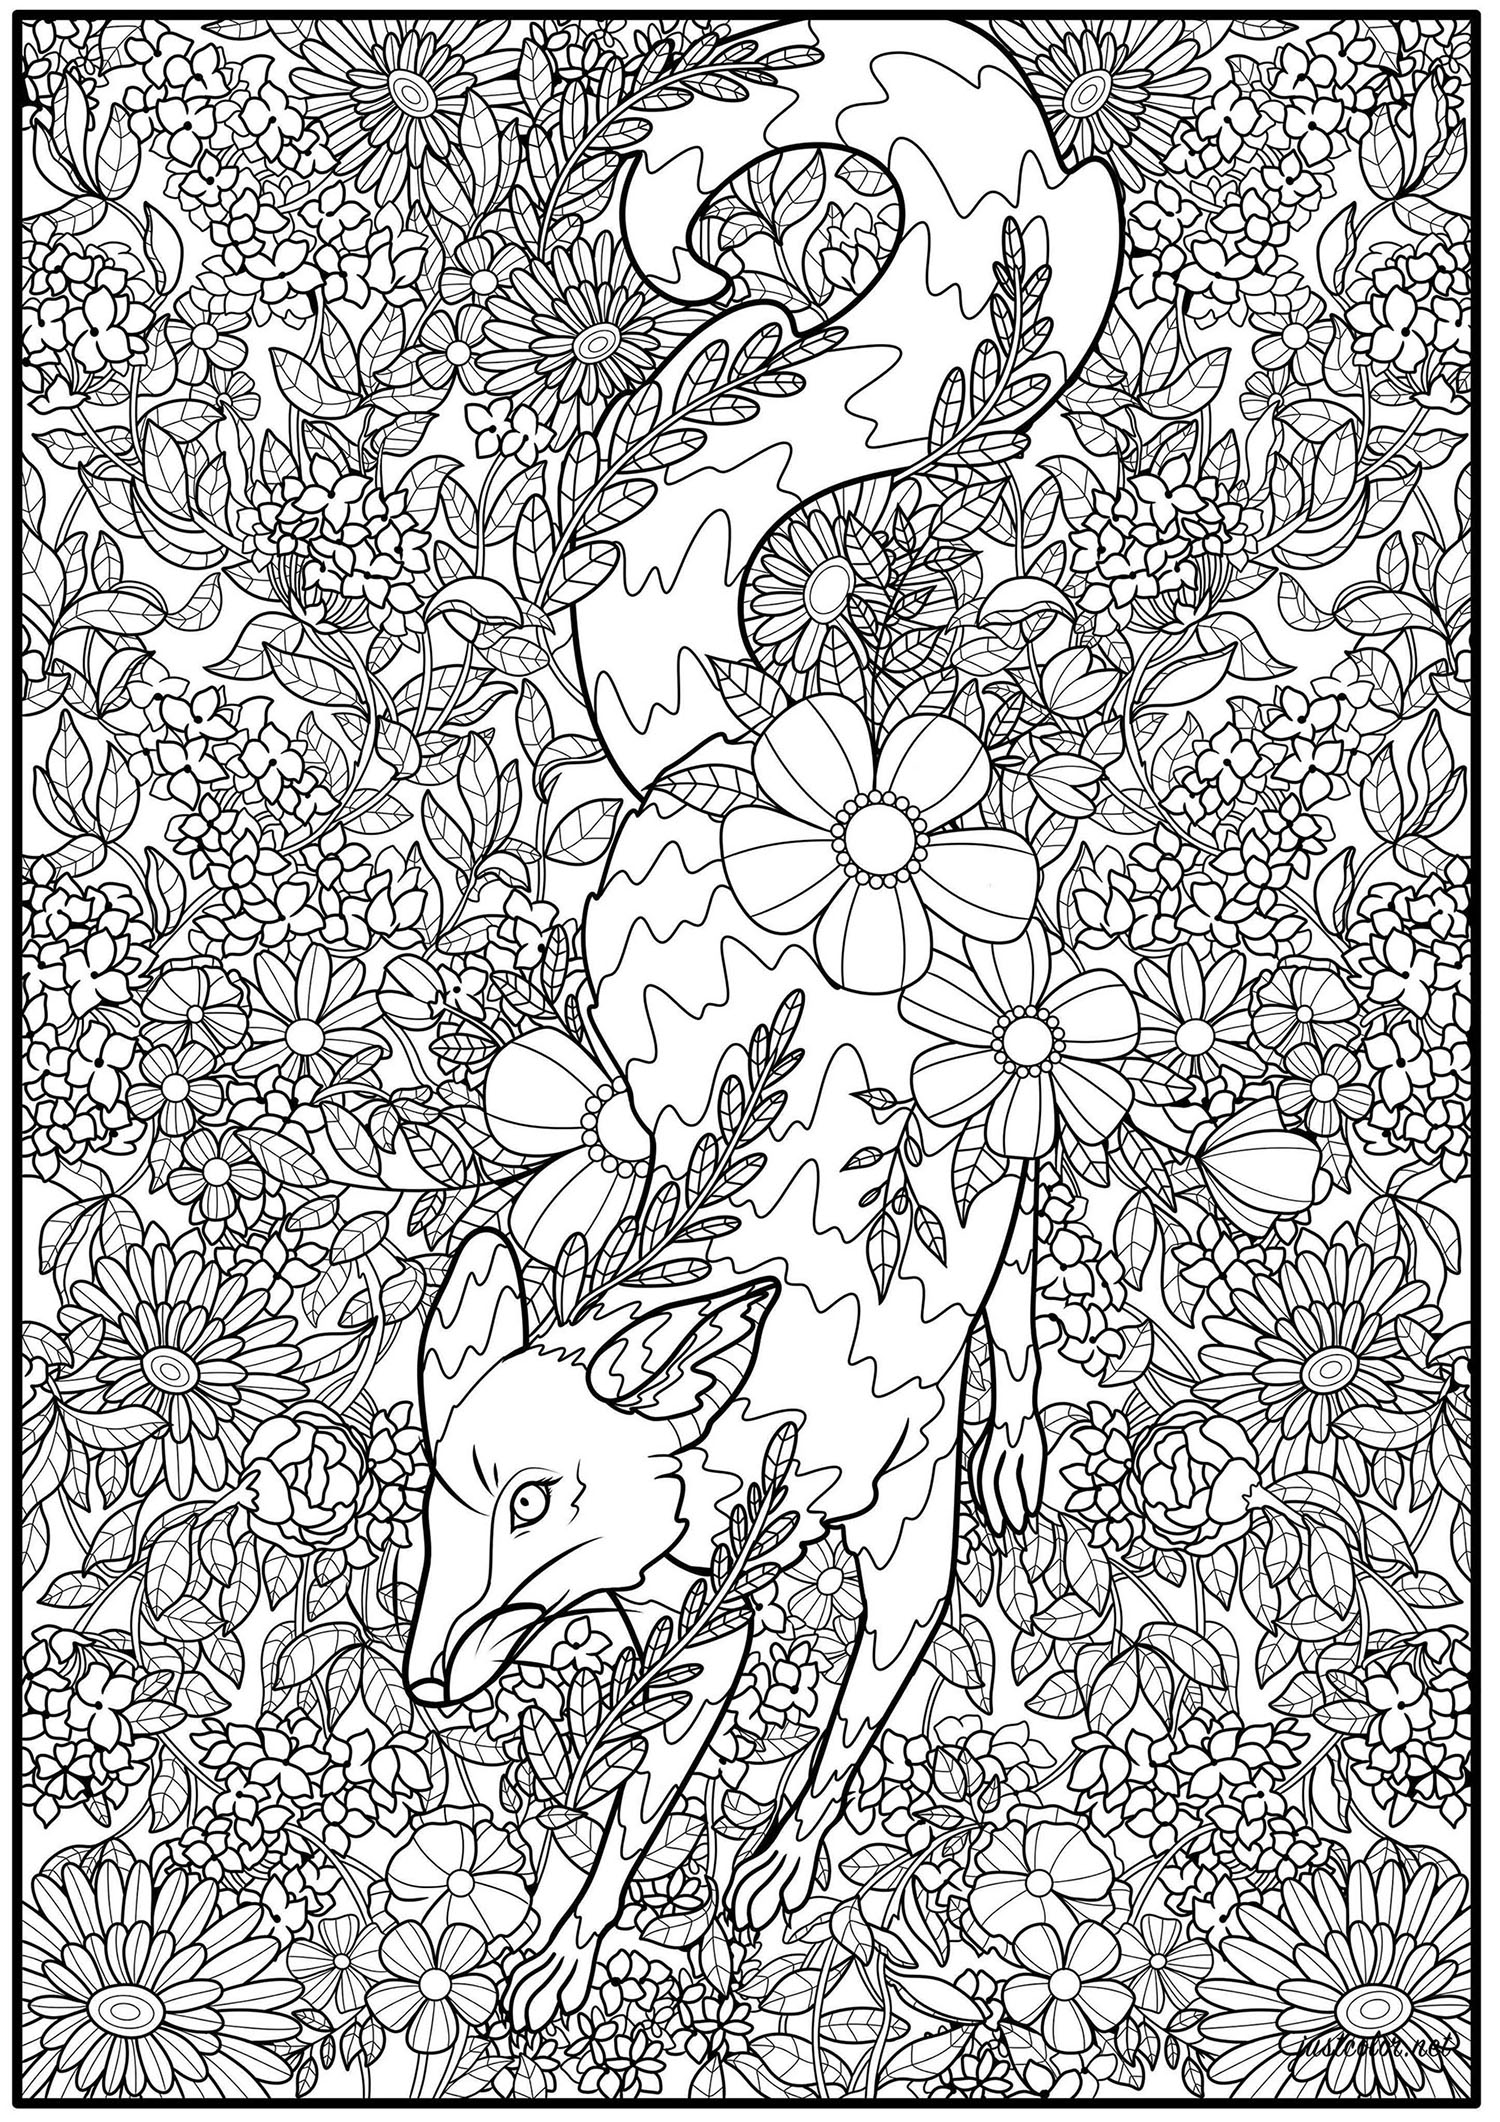 Cute fox surrounded by a multitude of wild flowers, Artist : Océane D